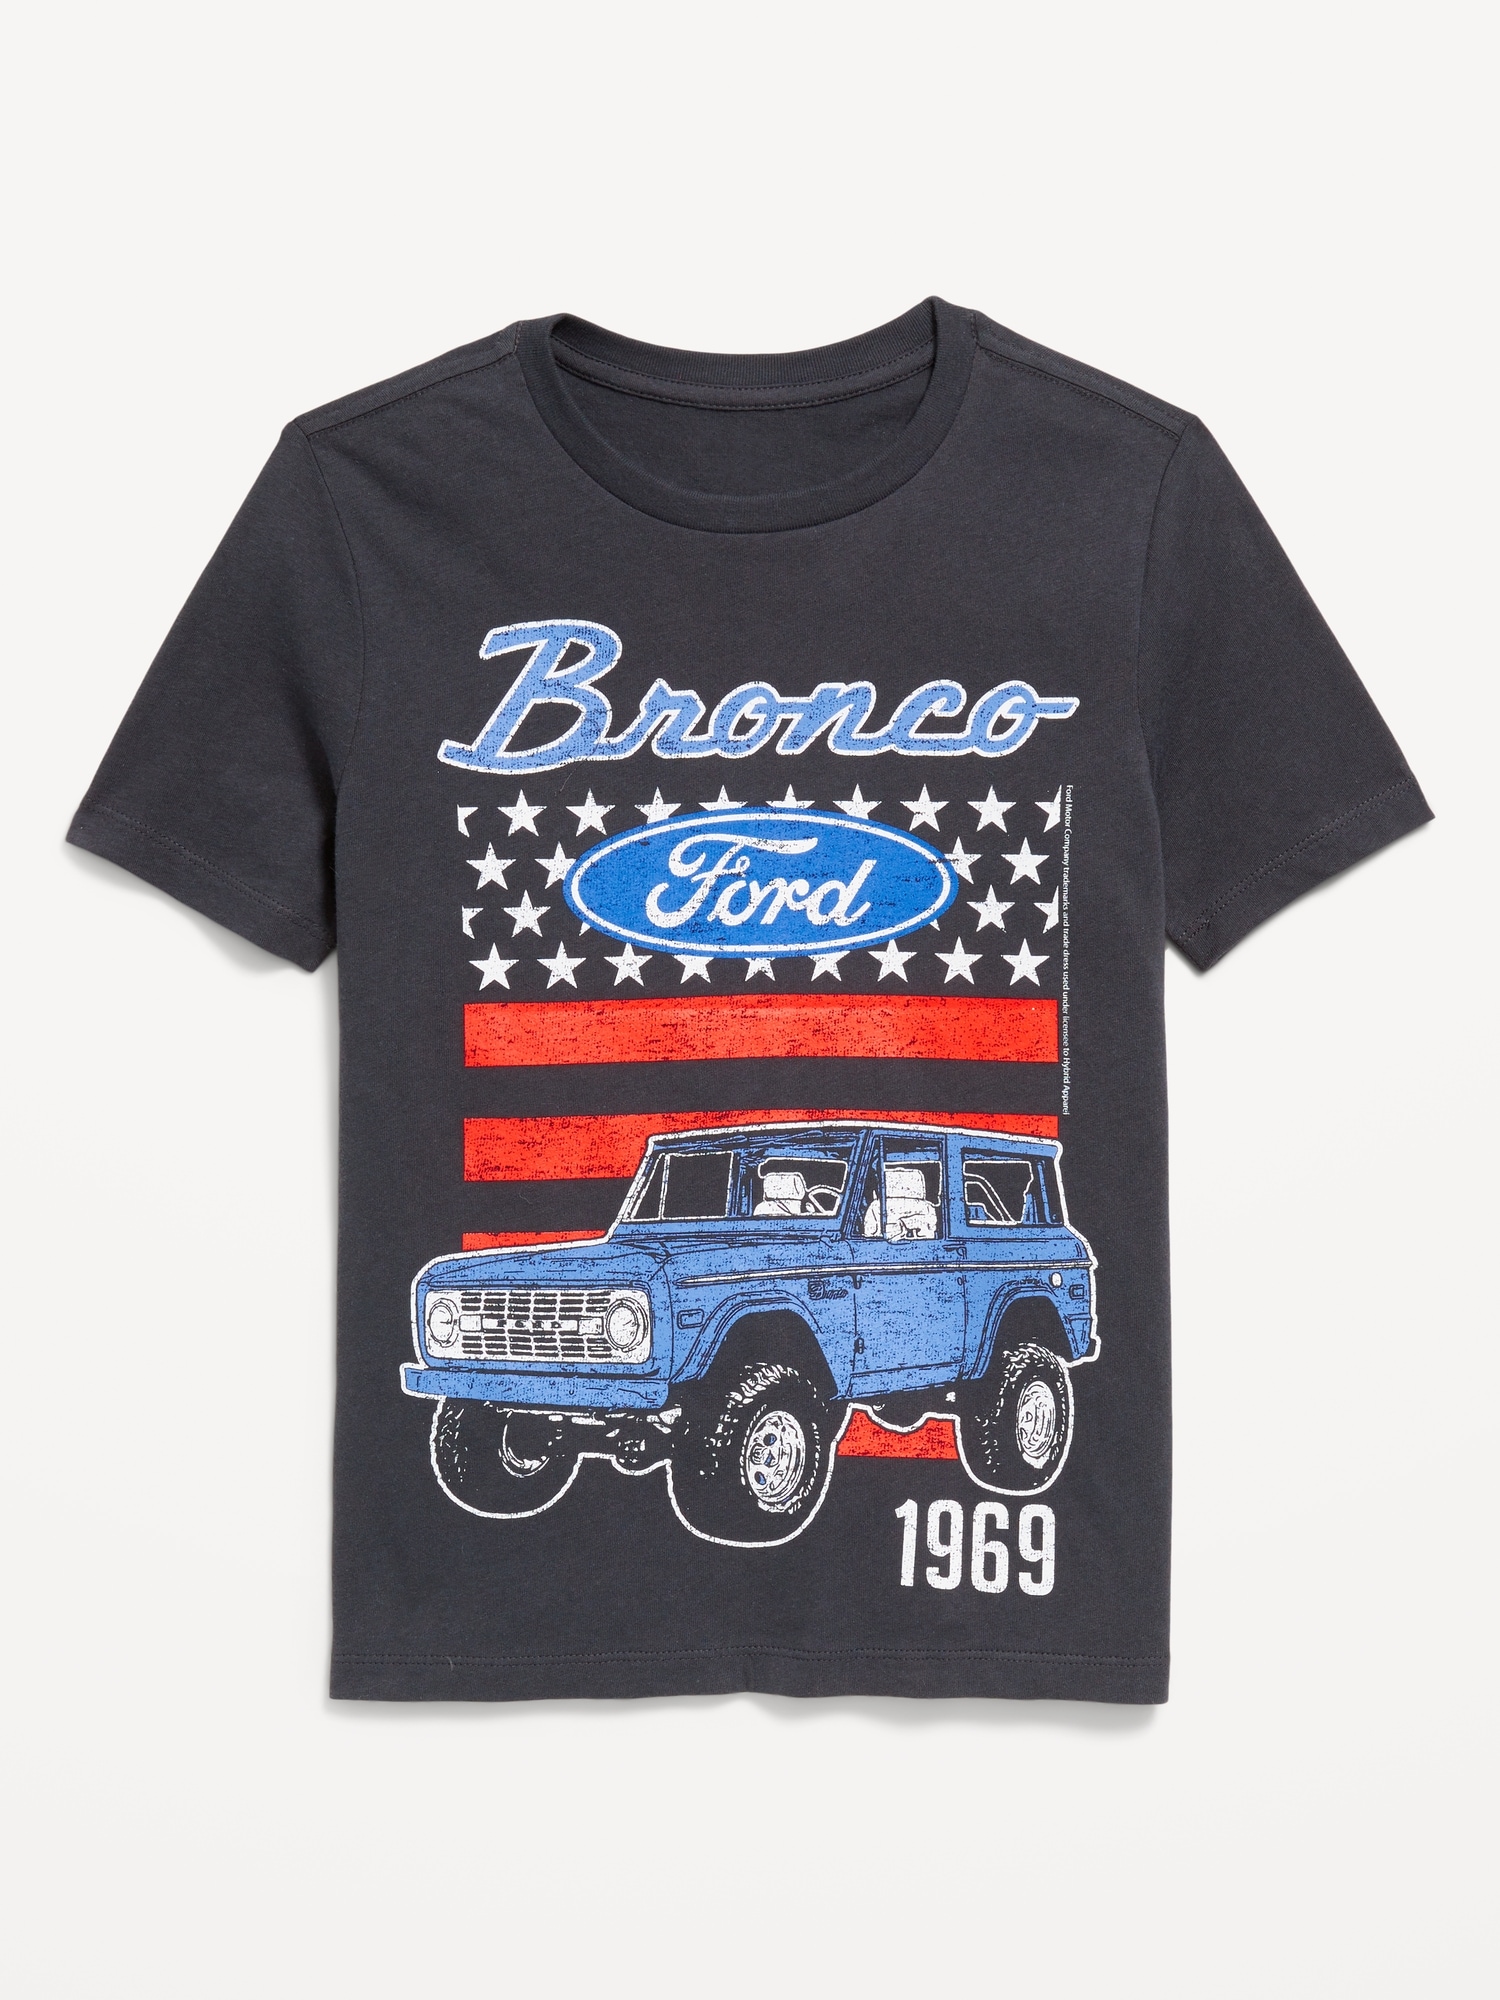 Ford Bronco Gender-Neutral Graphic T-Shirt for Kids